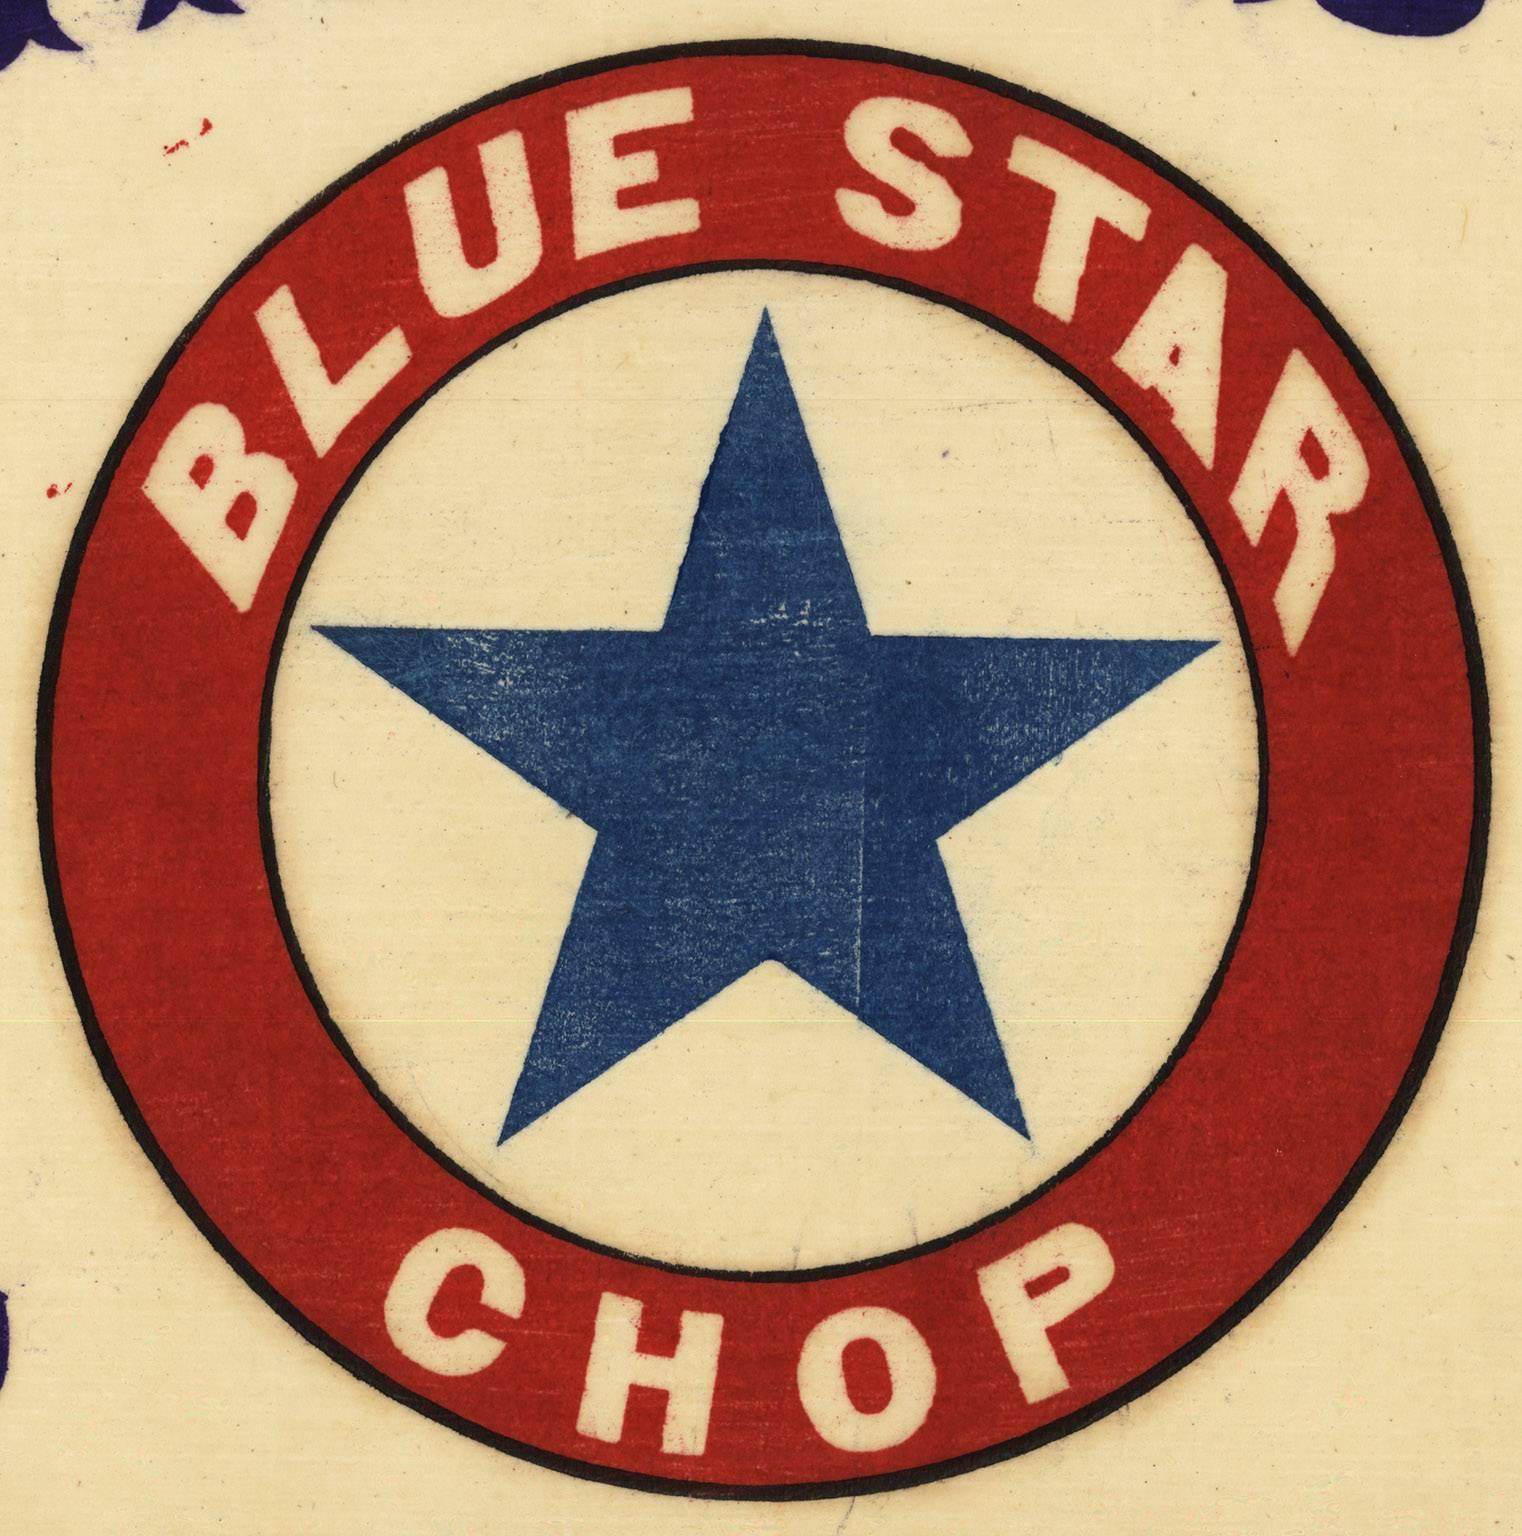 Choicest Blue Star Chop - Other Art Style Print by Unknown